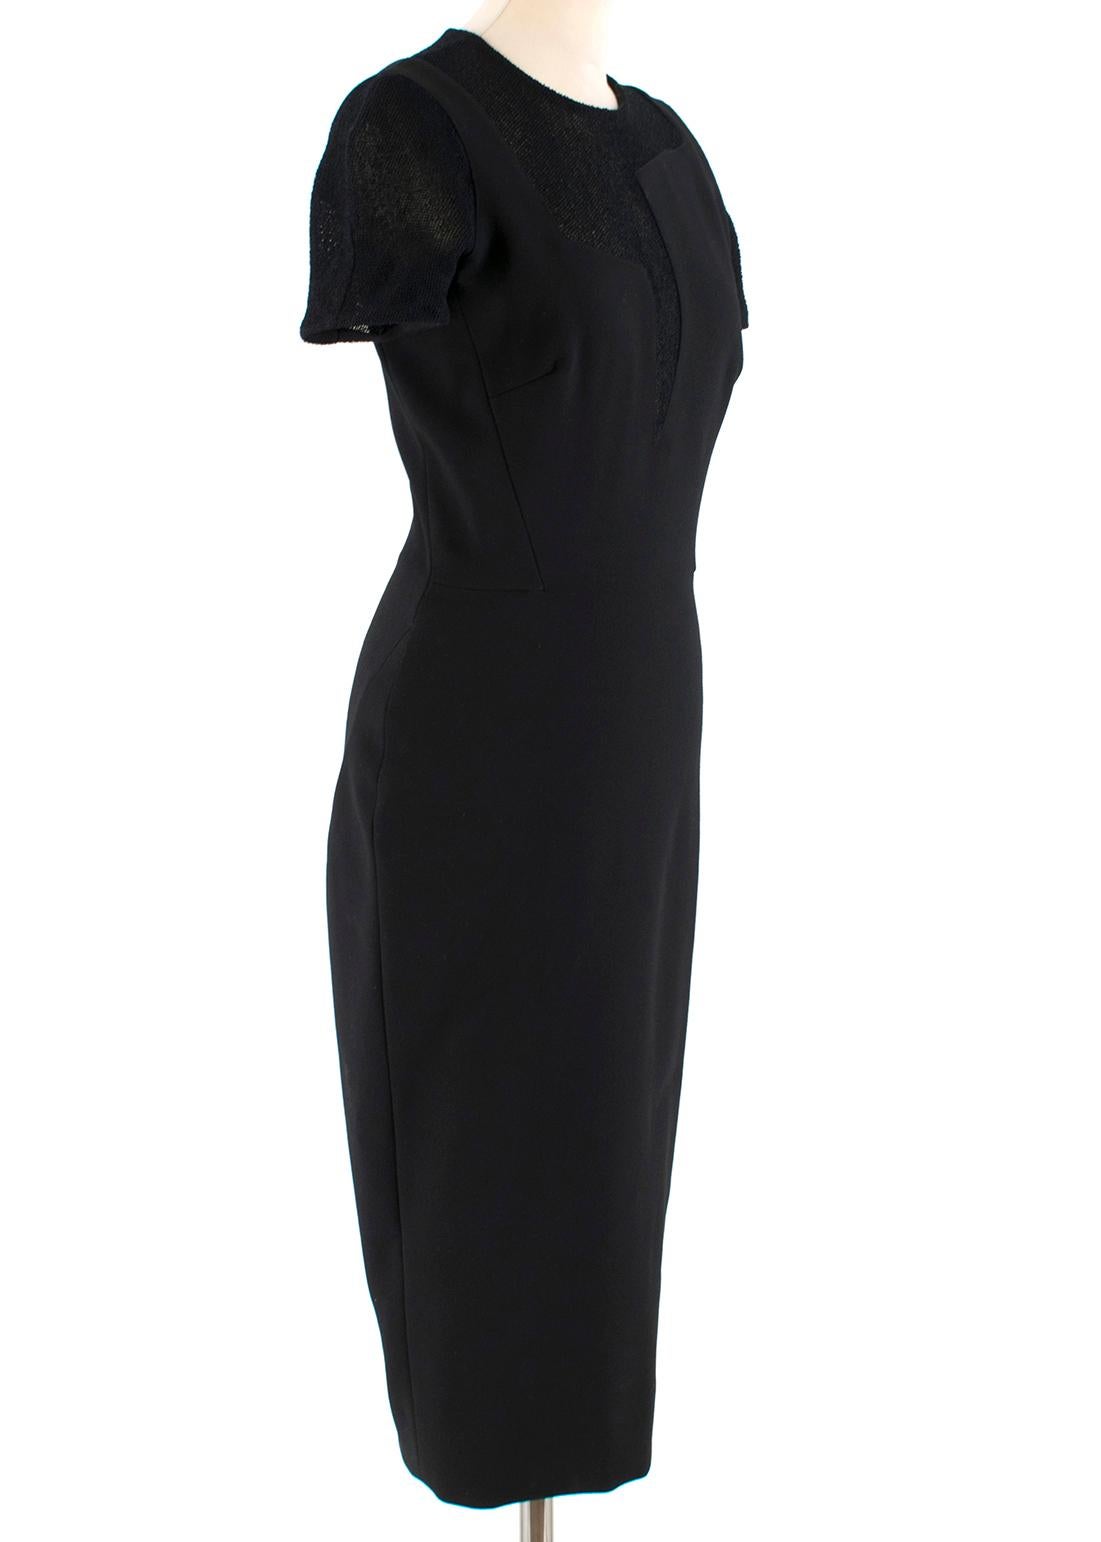 Victoria Beckham Black Sheer Panelled Fitted Midi Dress

- 100% Cotton black dress with transparent details on the neck and sleeves  
- Short sleeves, scoop neck 
- Slim fit 
- Zip fastening on the back 

Please note, these items are pre-owned and